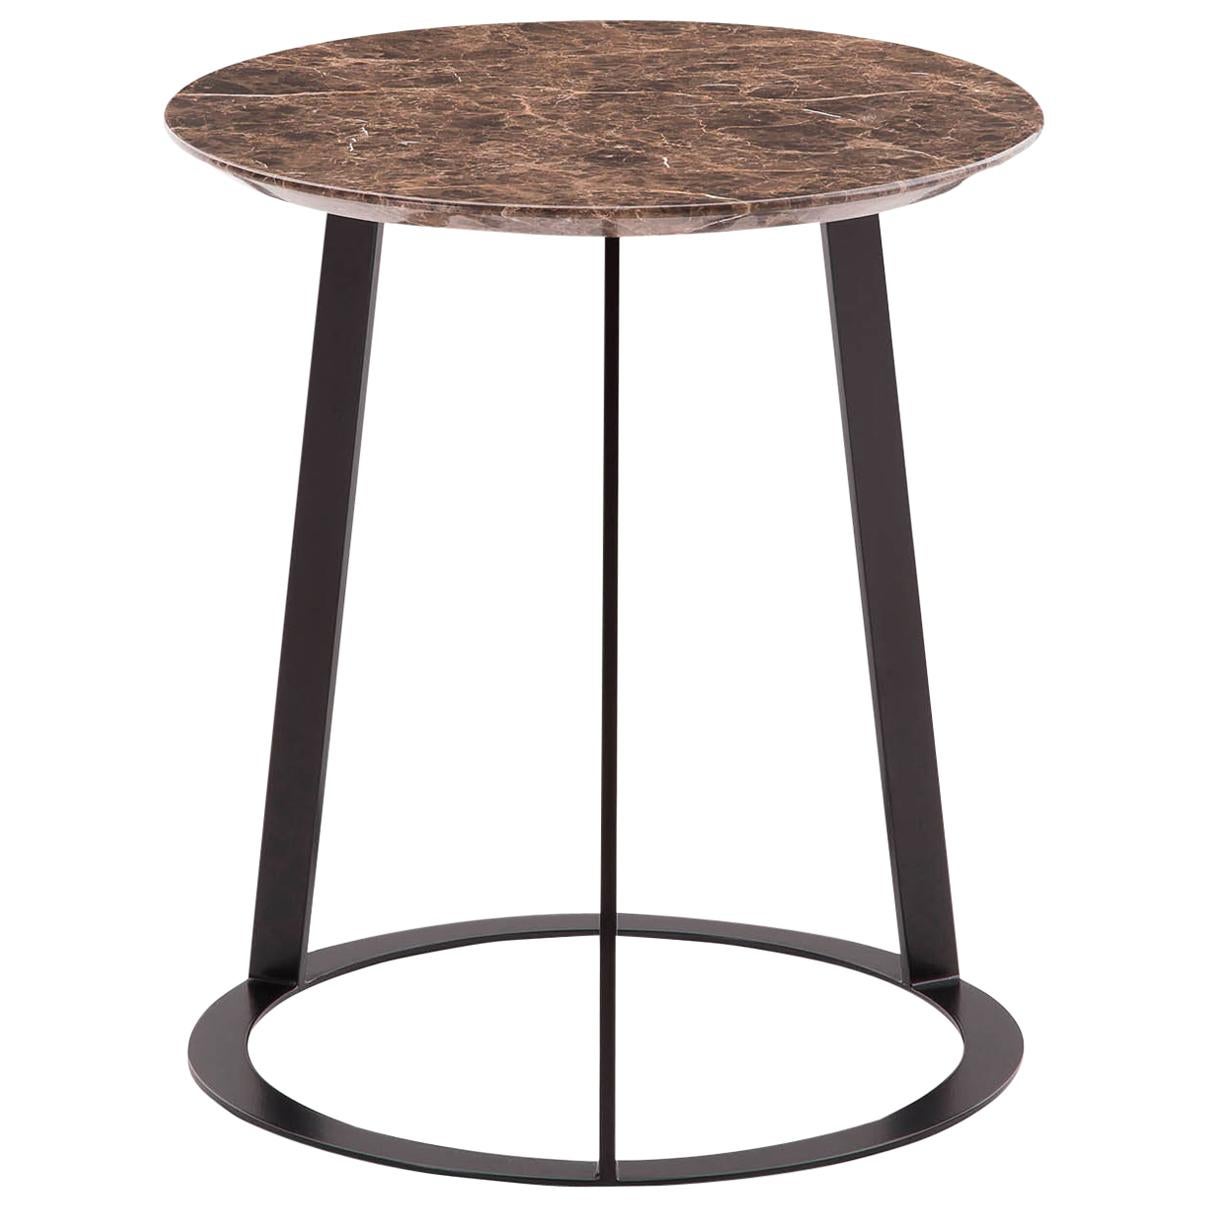 Horm Side Tables